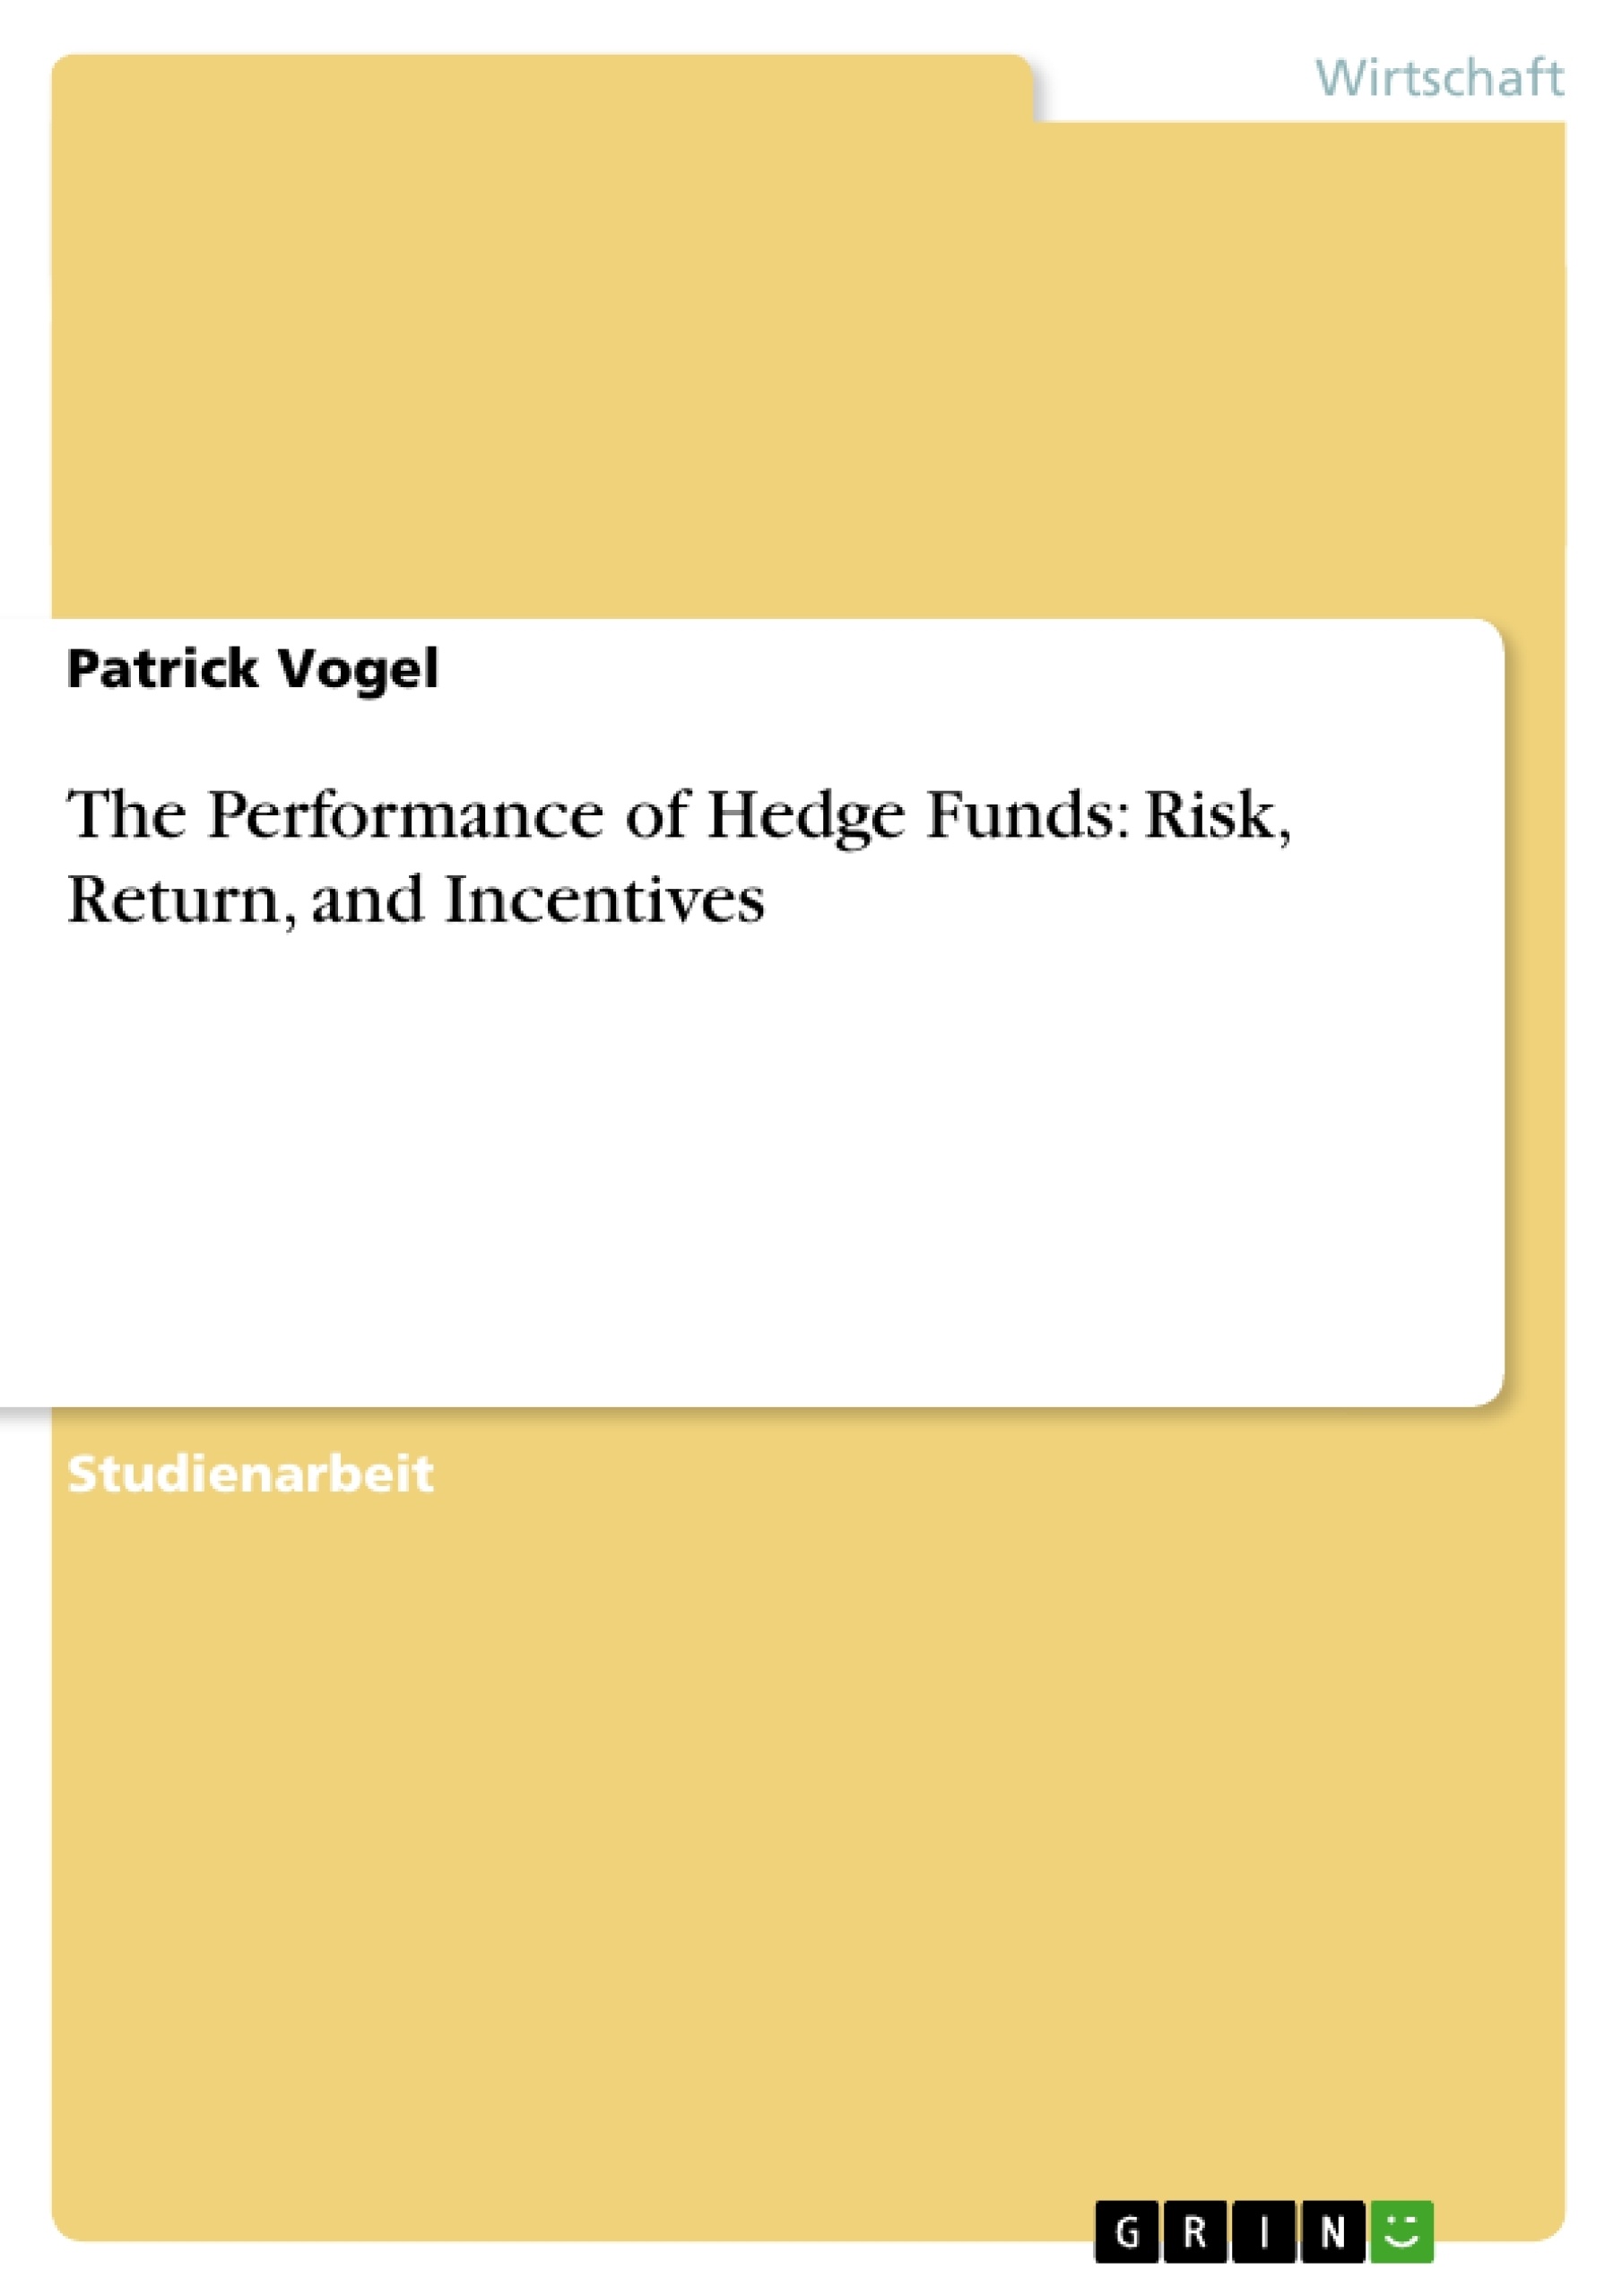 Titel: The Performance of Hedge Funds: Risk, Return, and Incentives